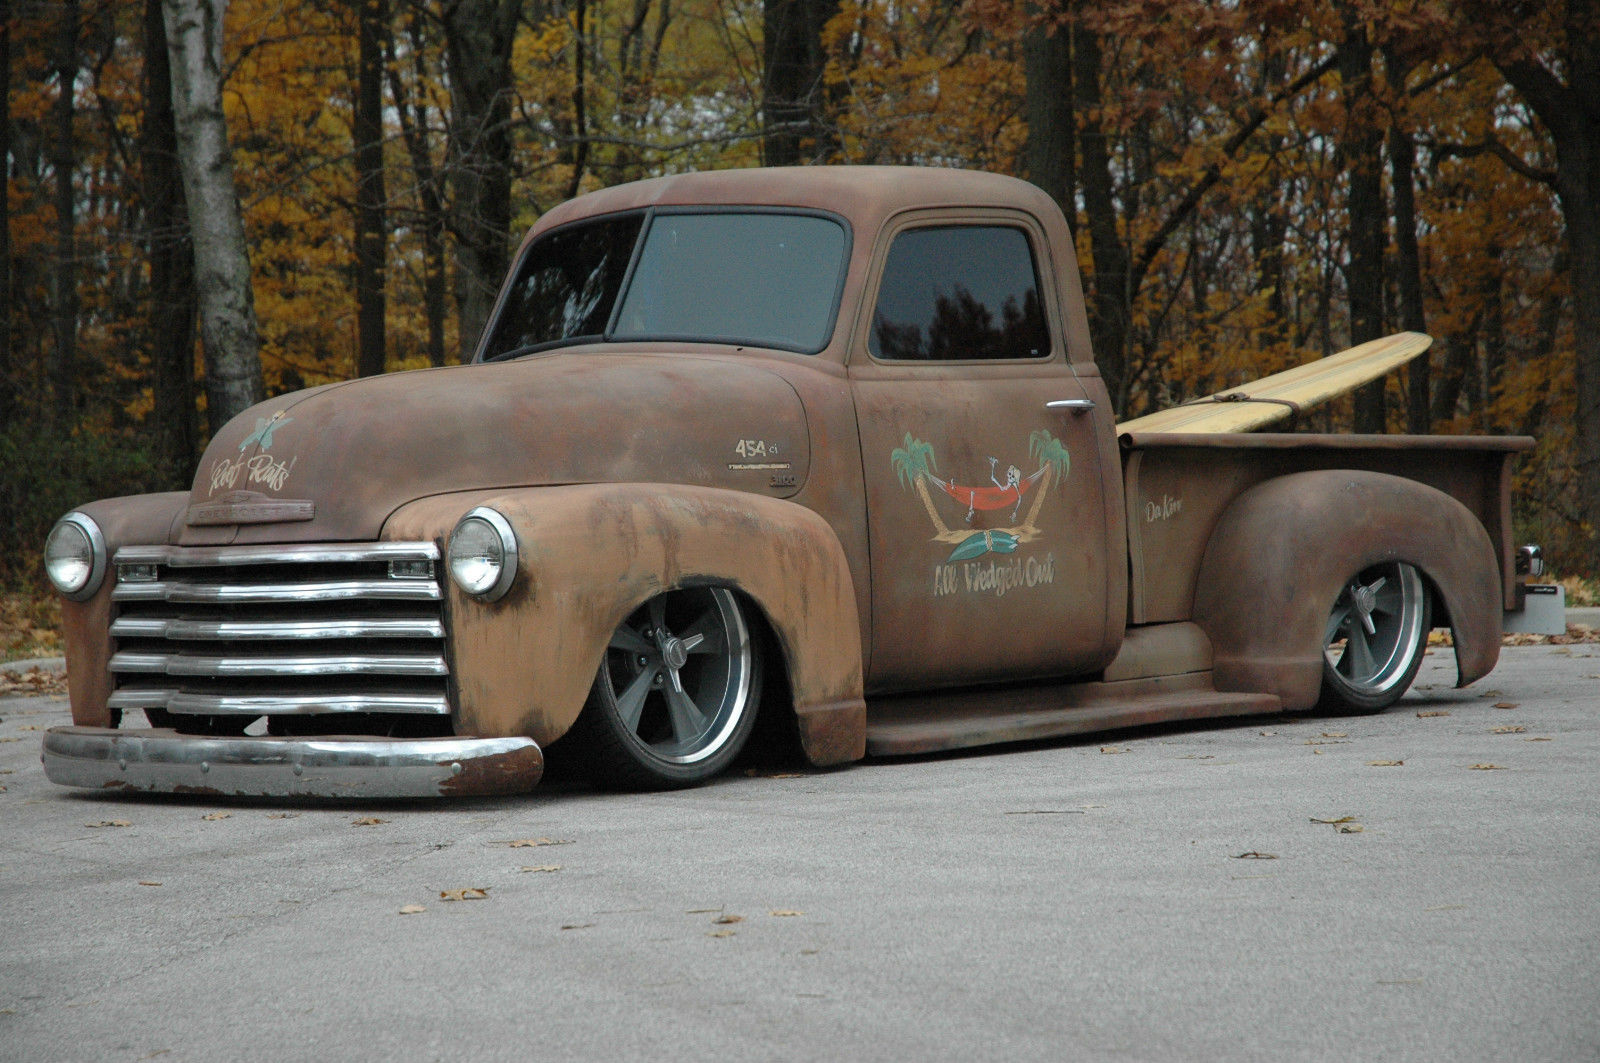 1952 chevy truck with 454